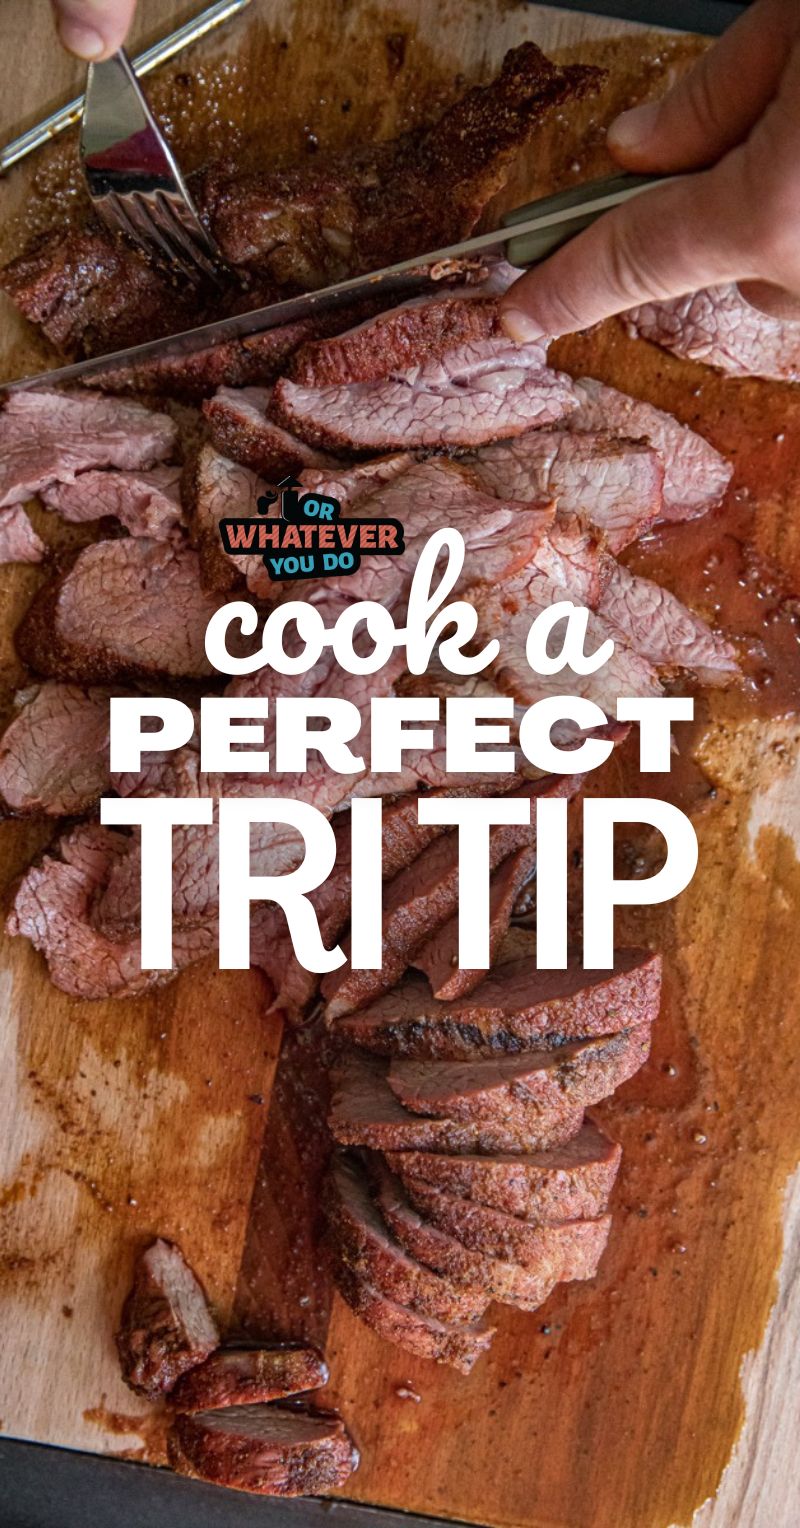 Hot to Cook Tri-Tip